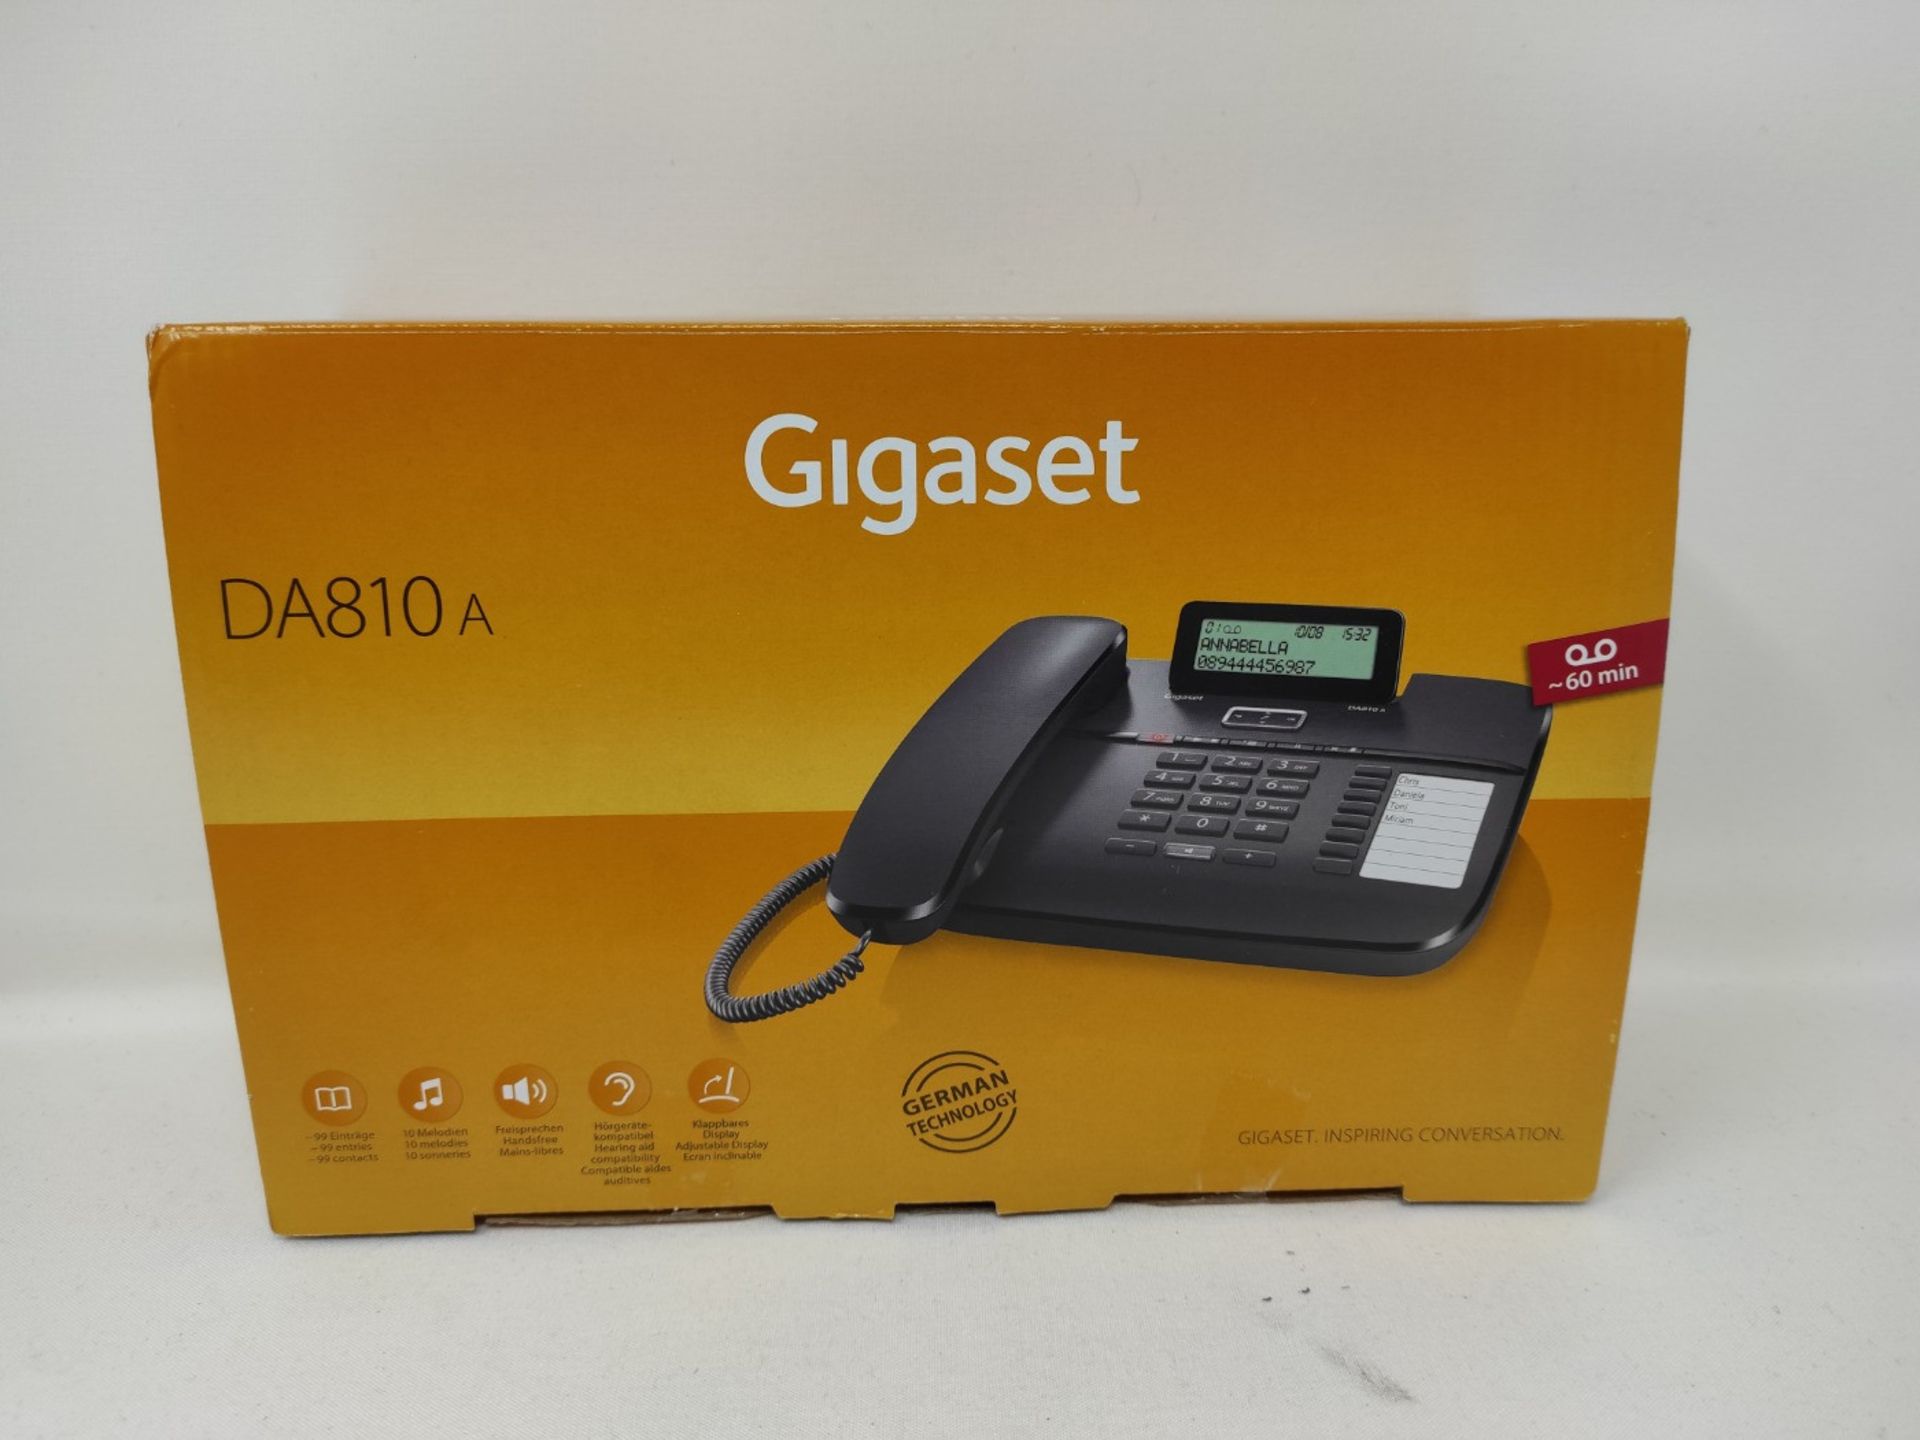 Gigaset DA810A - corded telephone with answering machine and hands-free function - fol - Image 2 of 3